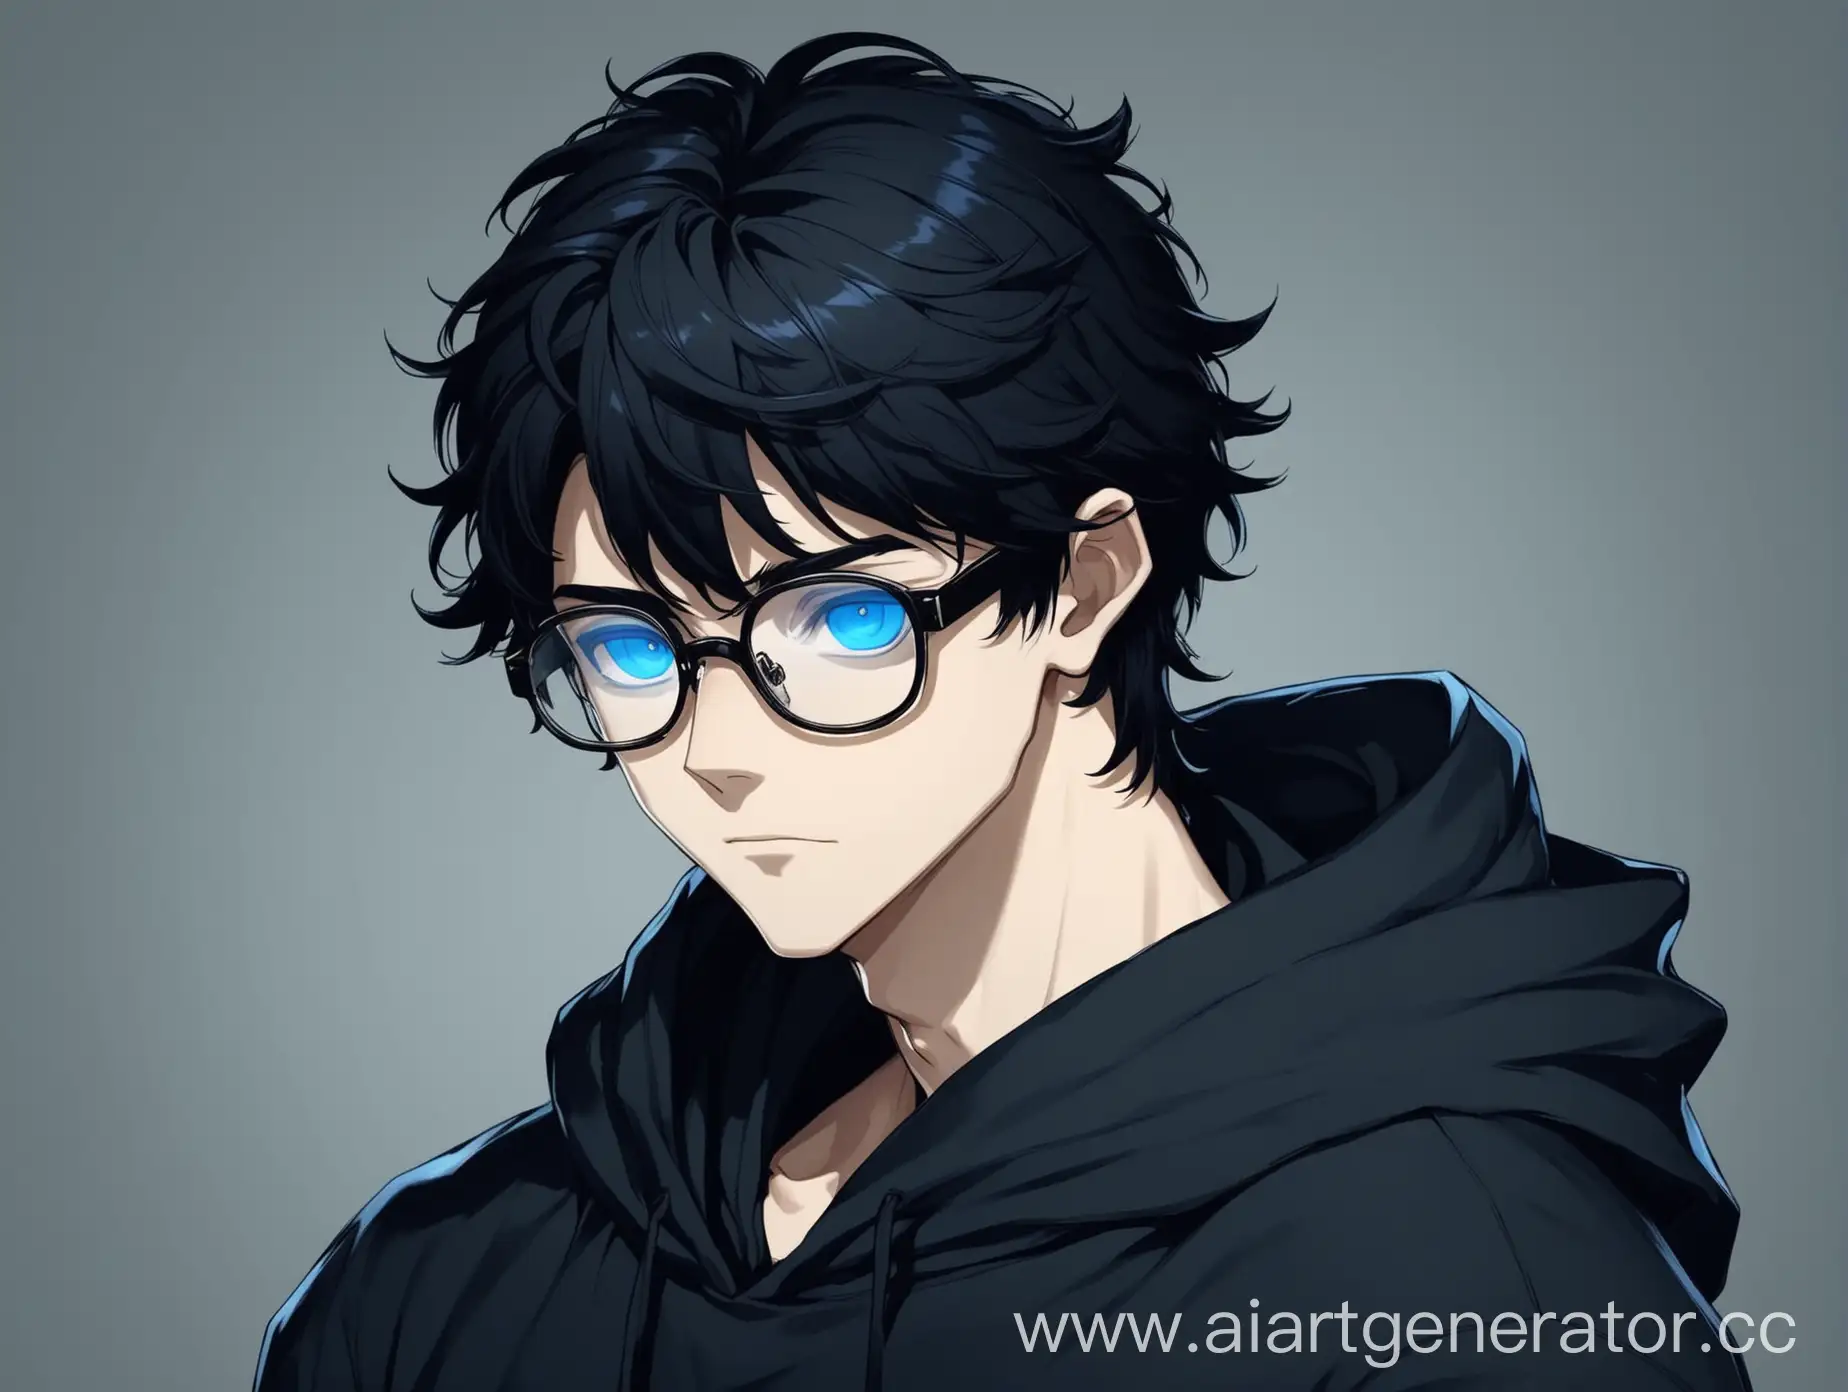 Male-Figure-in-Black-Hoodie-with-Blue-Glasses-and-Eyes